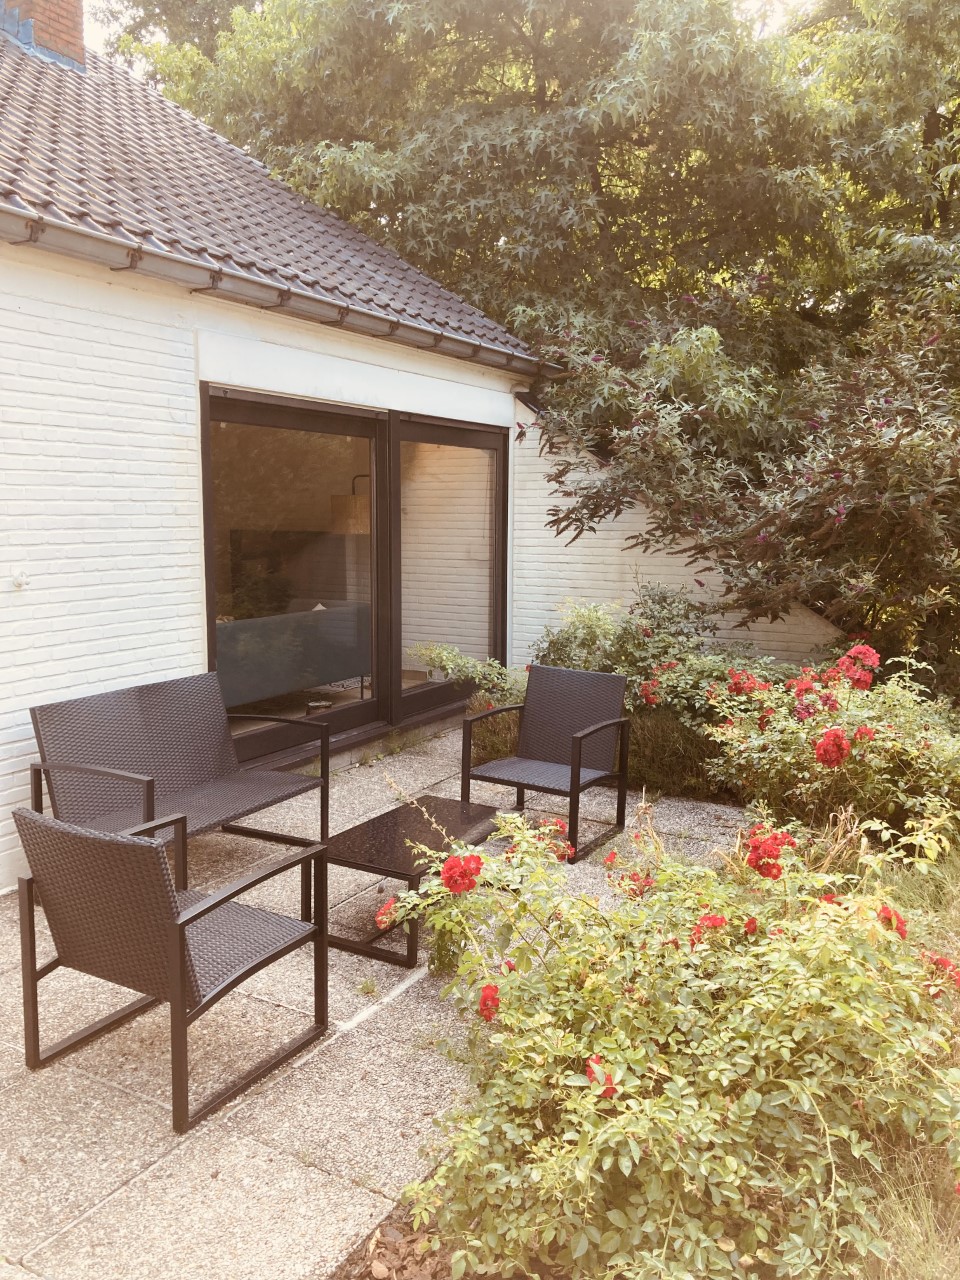 Middenheide - Furnished house for rent in Antwerp4